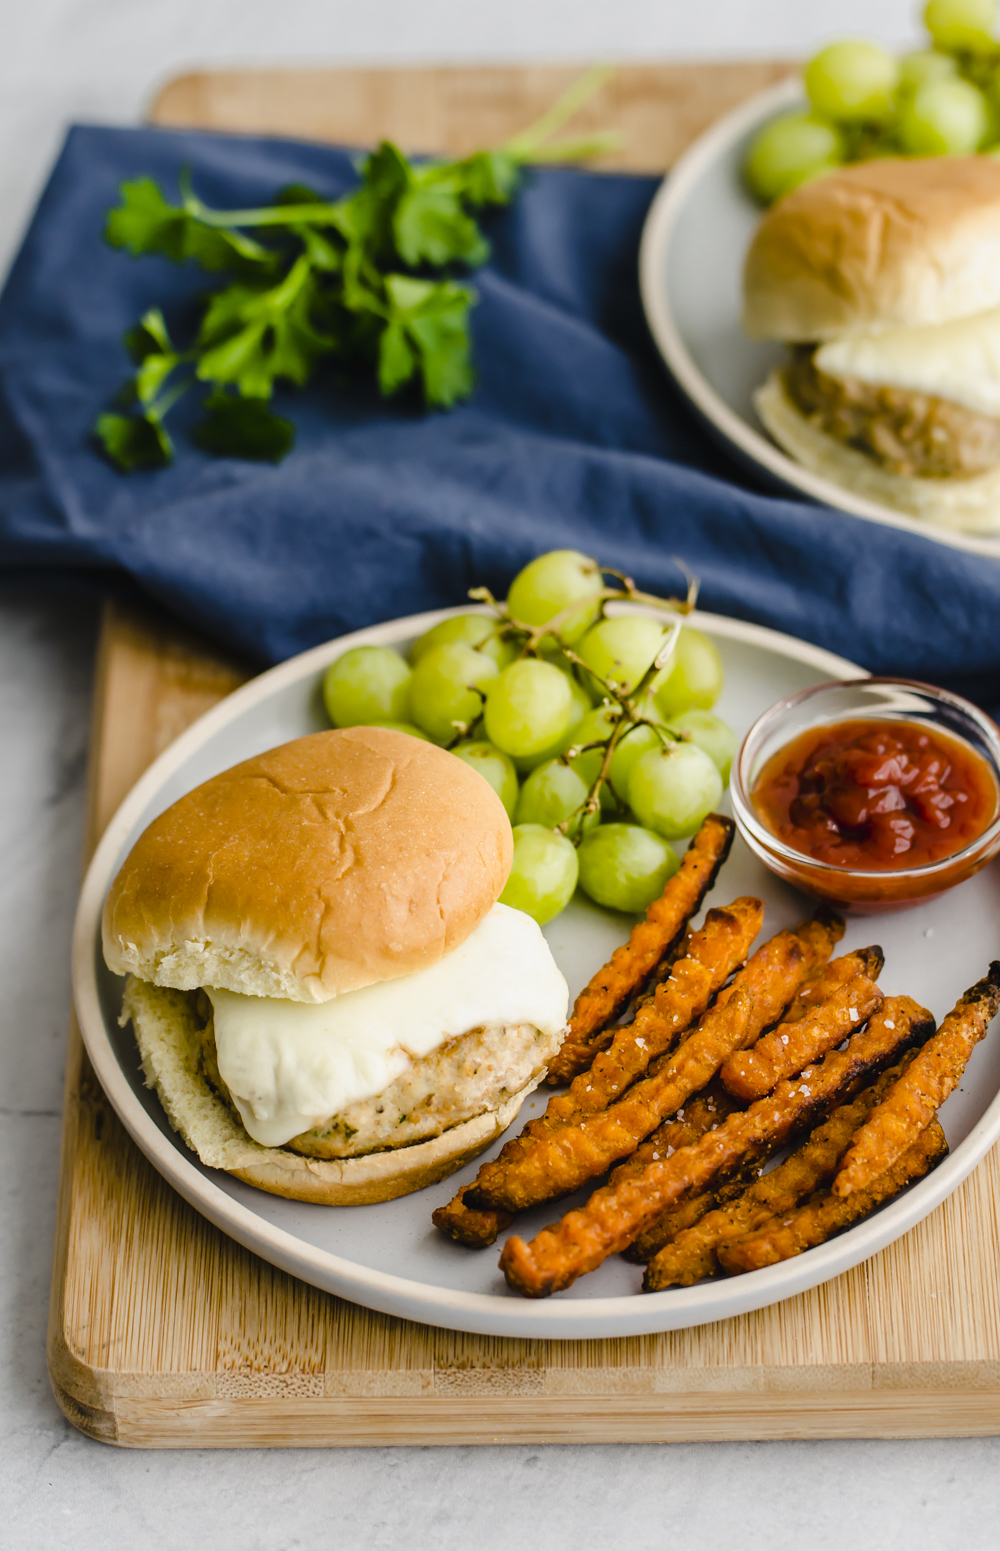 Mini chicken burgers on white plates with sweet potato fries, and grapes.